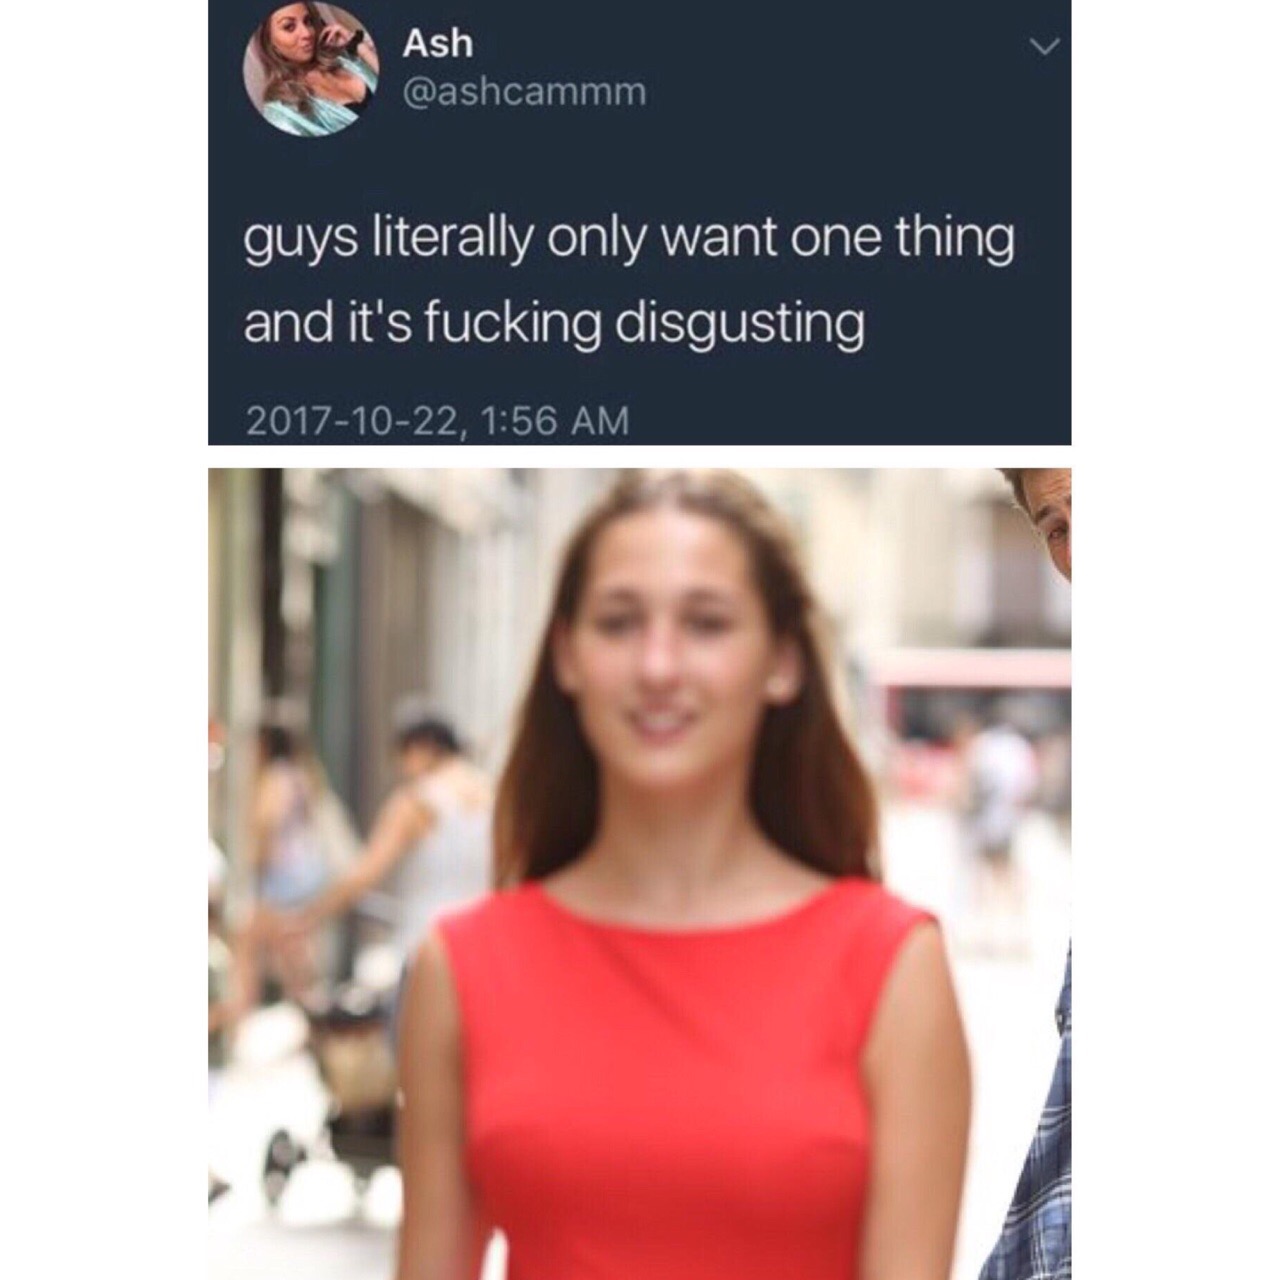 guys literally want one thing - Ash guys literally only want one thing and it's fucking disgusting ,